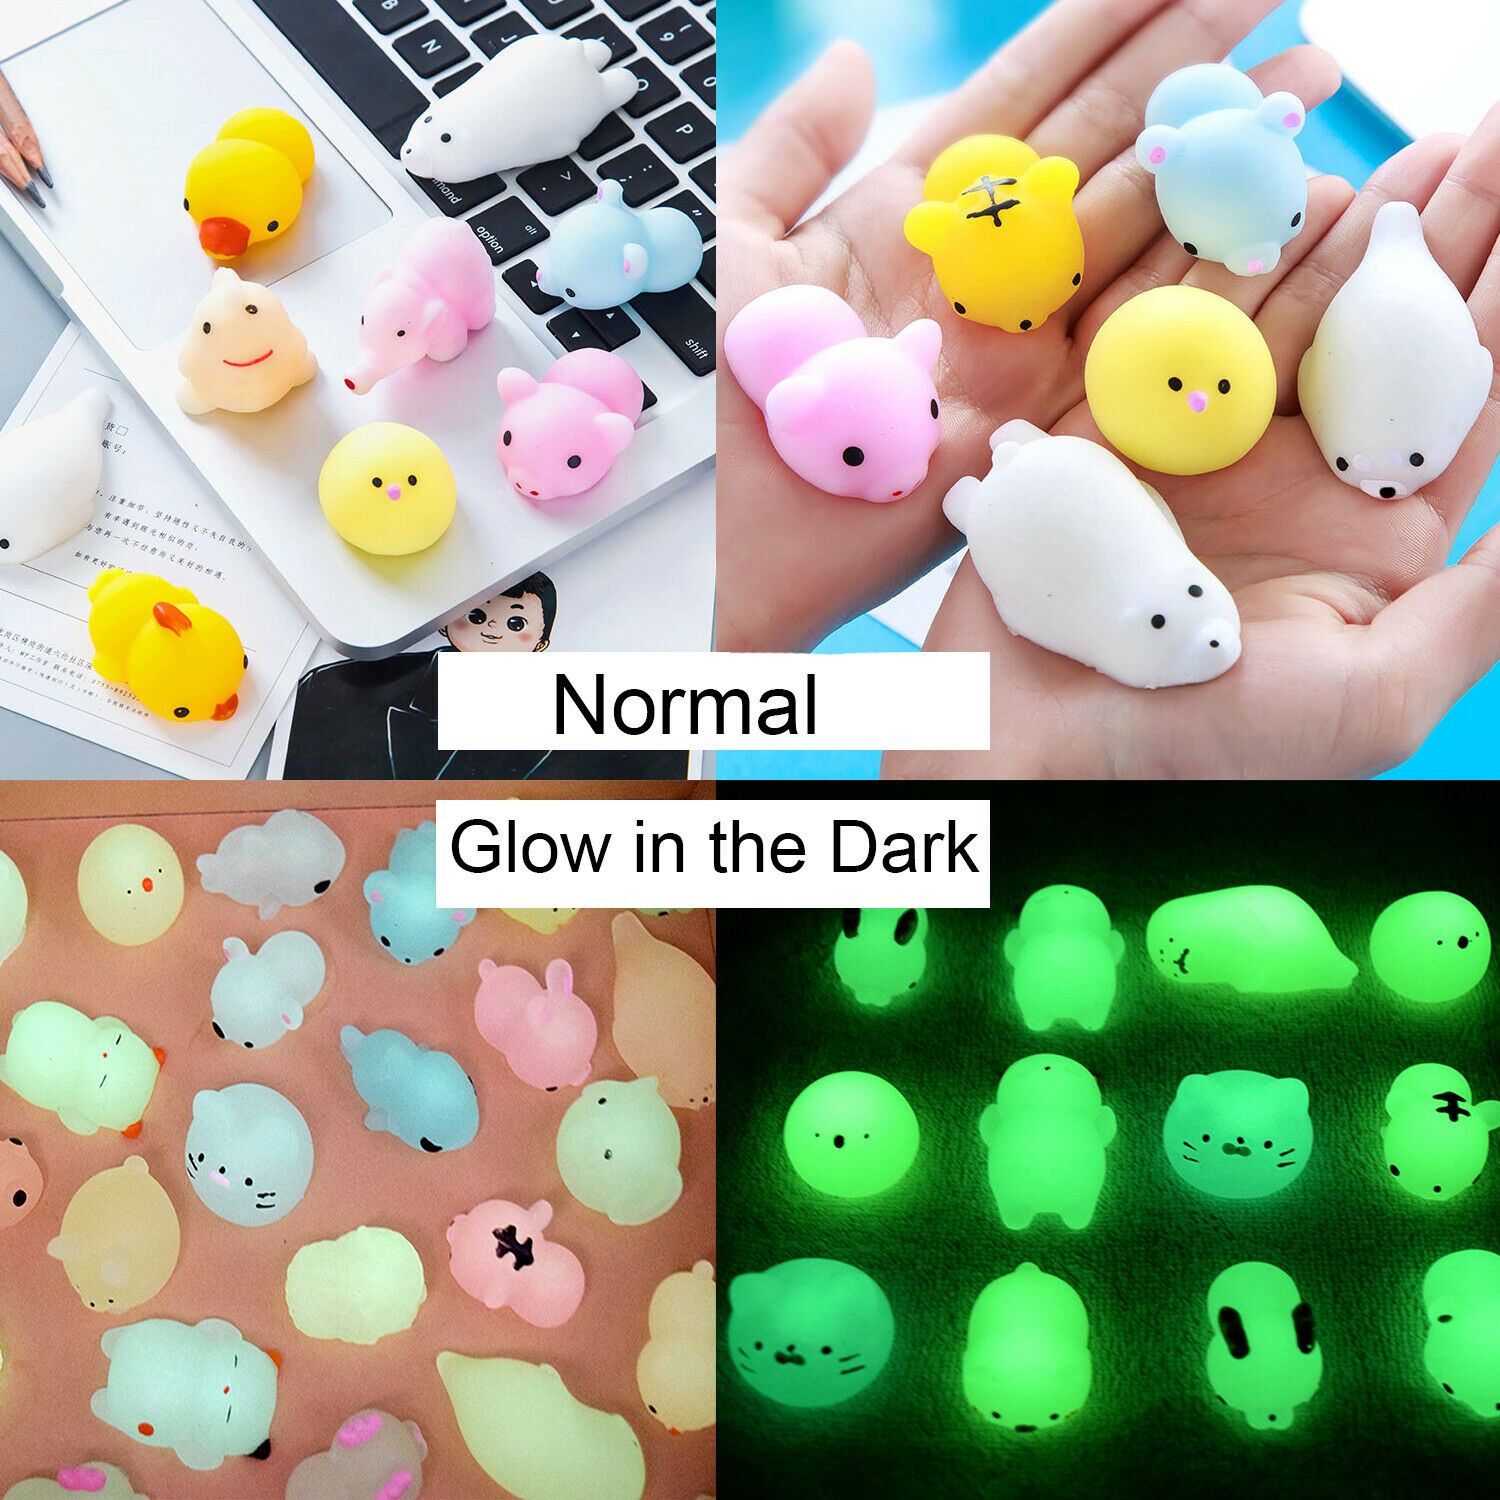 25~50 Squishy Lot Normal / Glow-in-the-darkf Rising Fidget Cute Animal Hand Toy